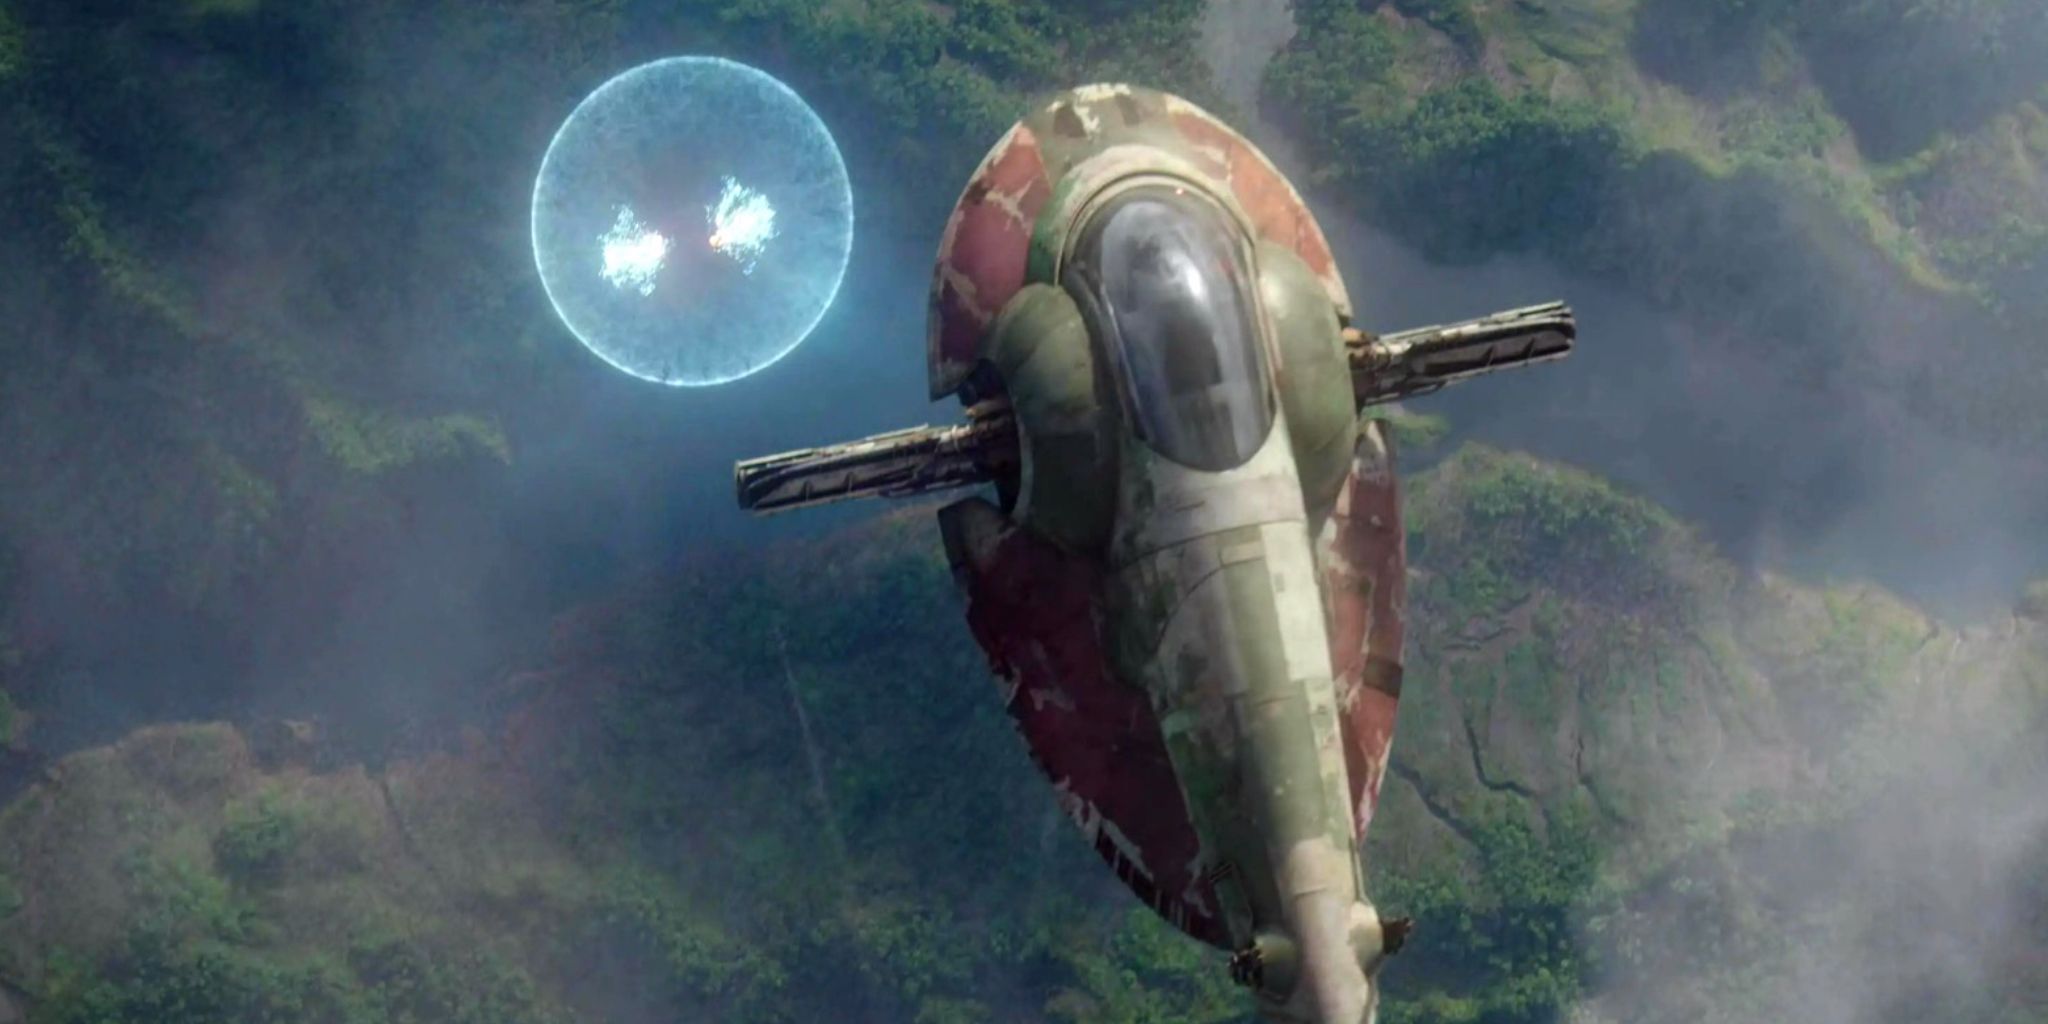 Boba Fett drops a seismic charge out of the Firespray gunship in The Mandalorian